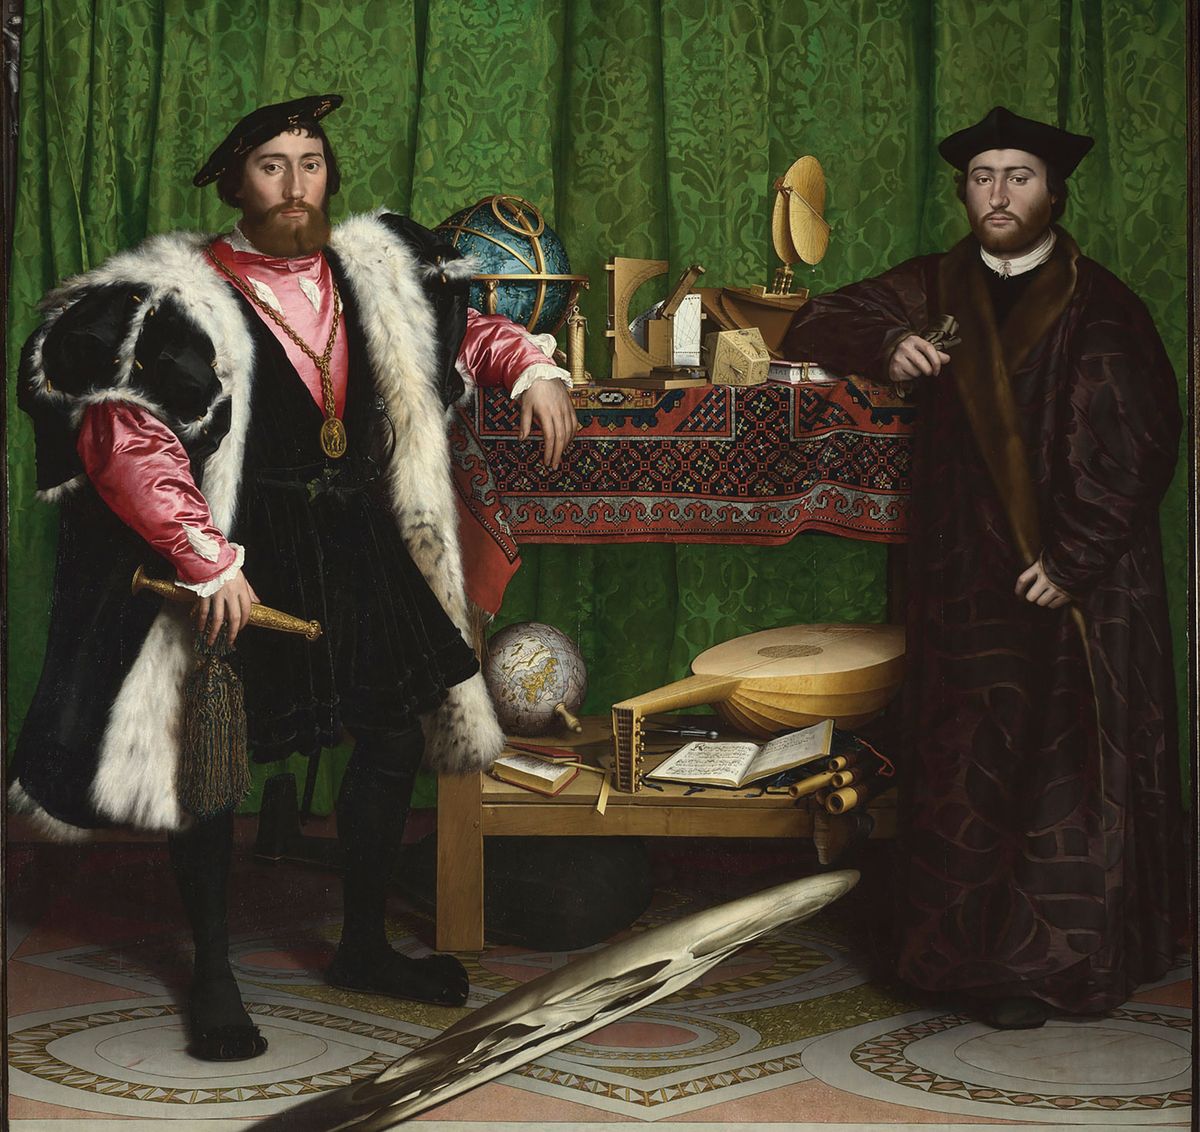 Hans Holbein the Younger, The Ambassadors (1533) was warped by water damage National Gallery, London